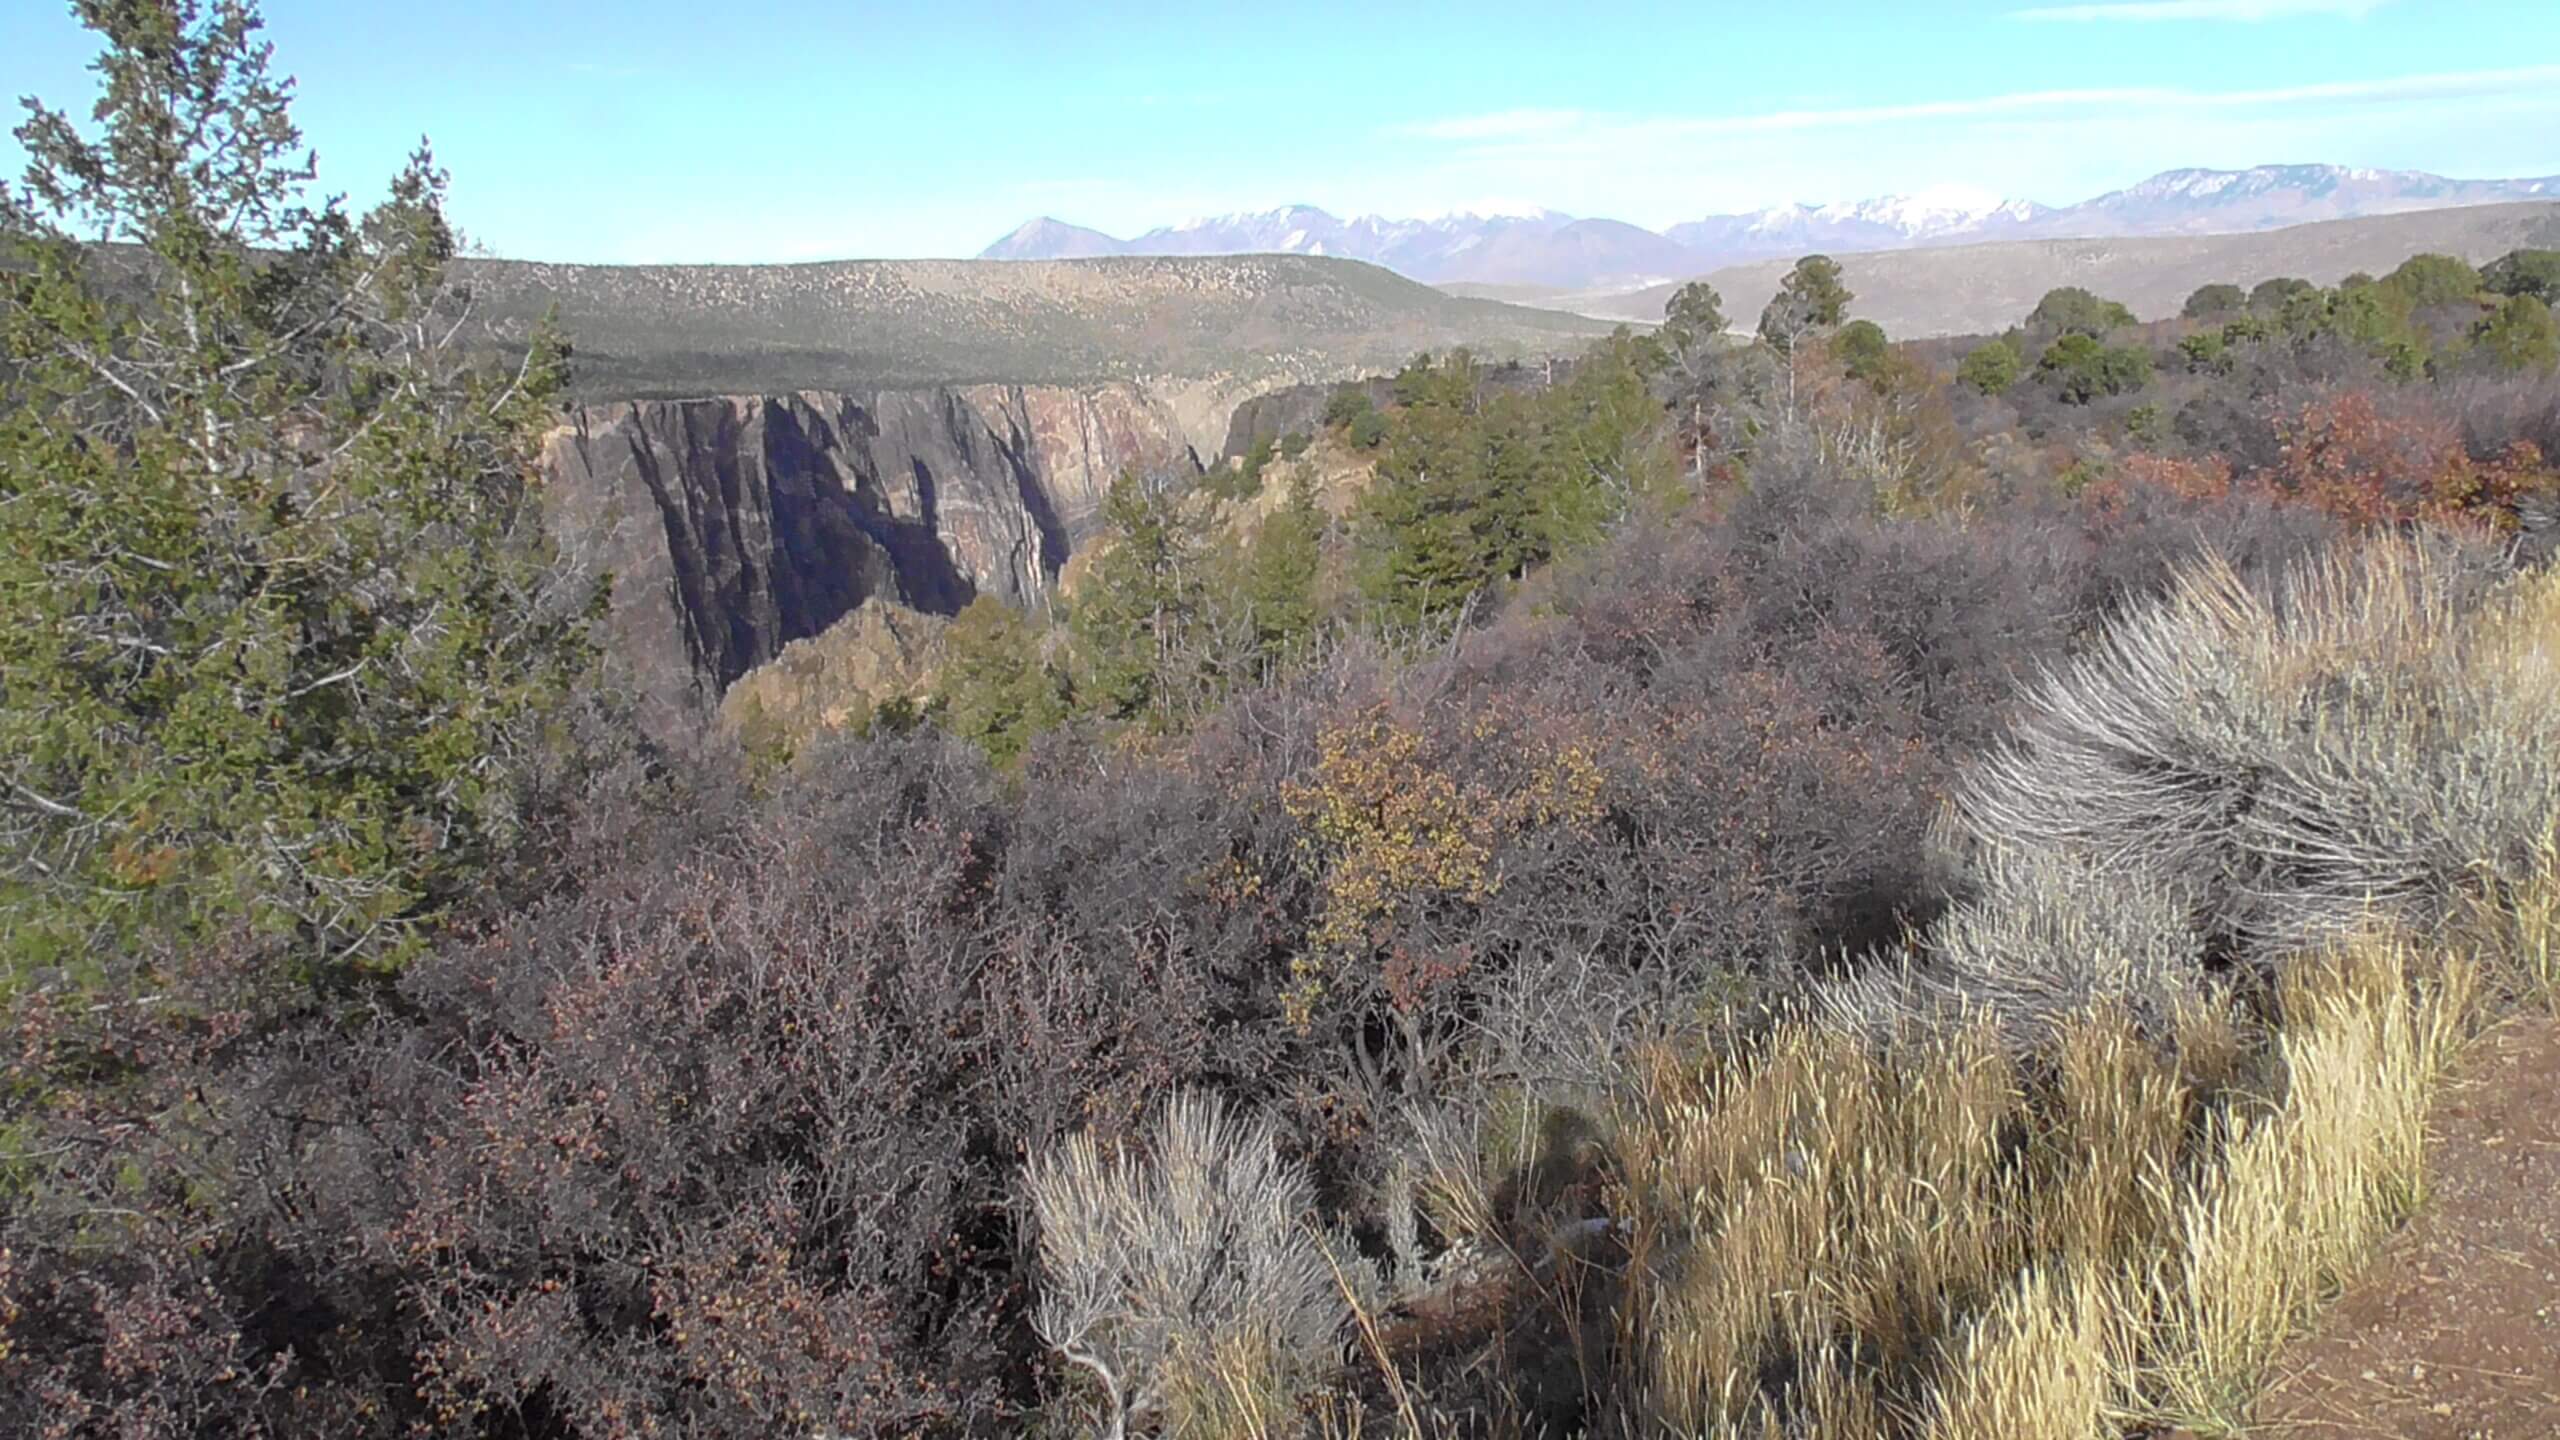 View from Highest Point, Black Canyon of the Gunnison National Park